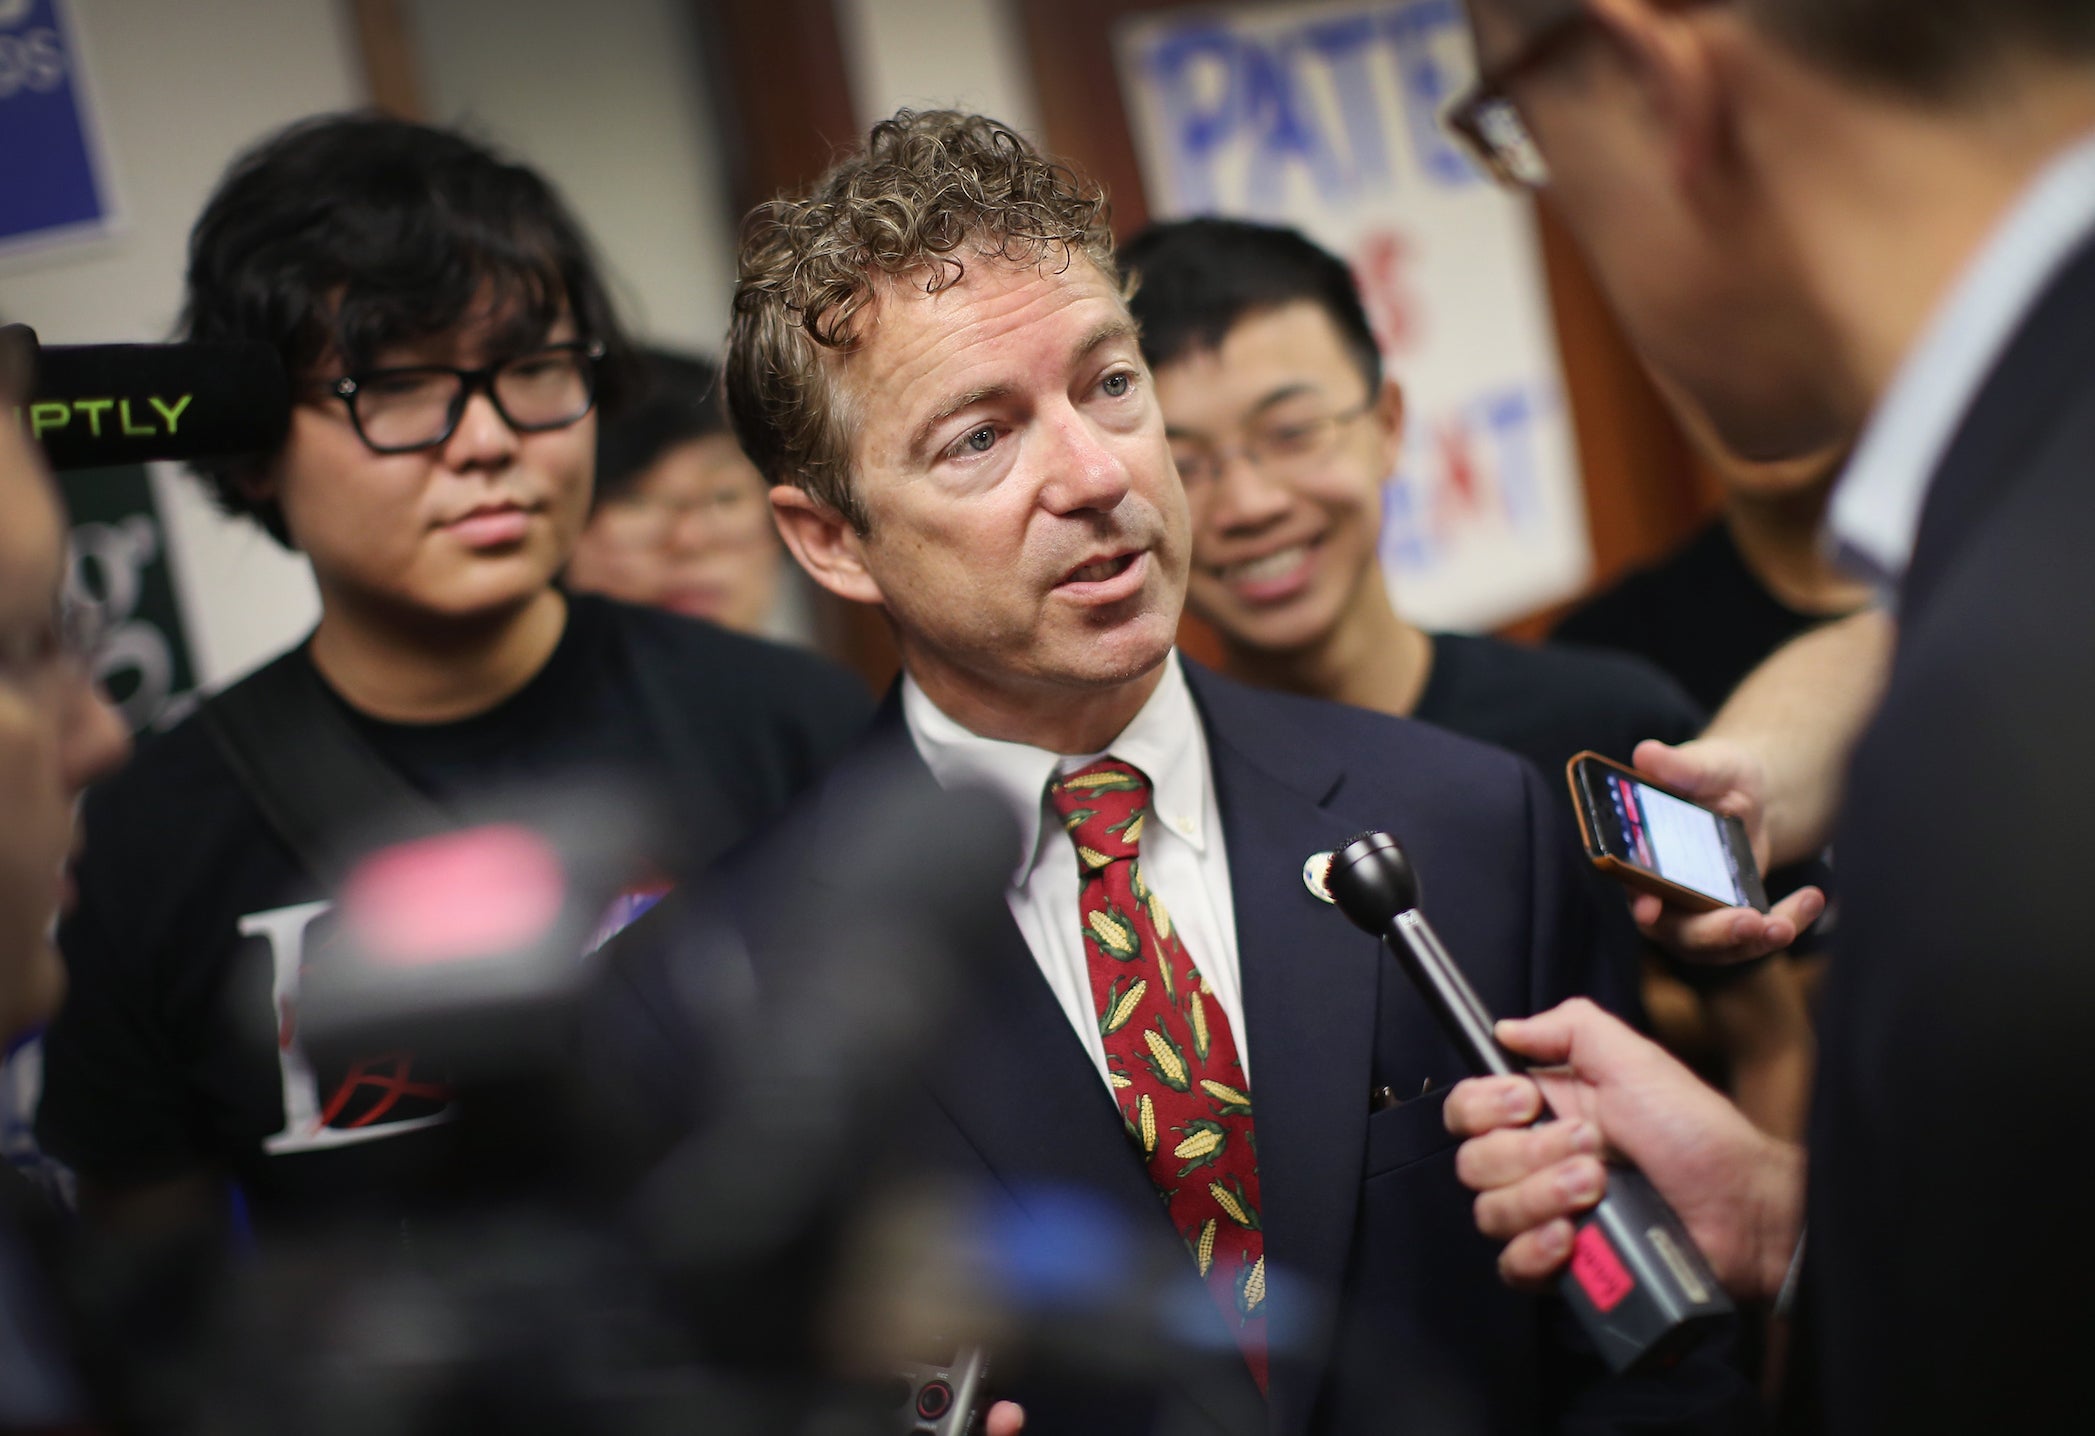 Rand Paul speaks to guests at the GOP Des Moines Victory Office in Urbandale, Iowa.